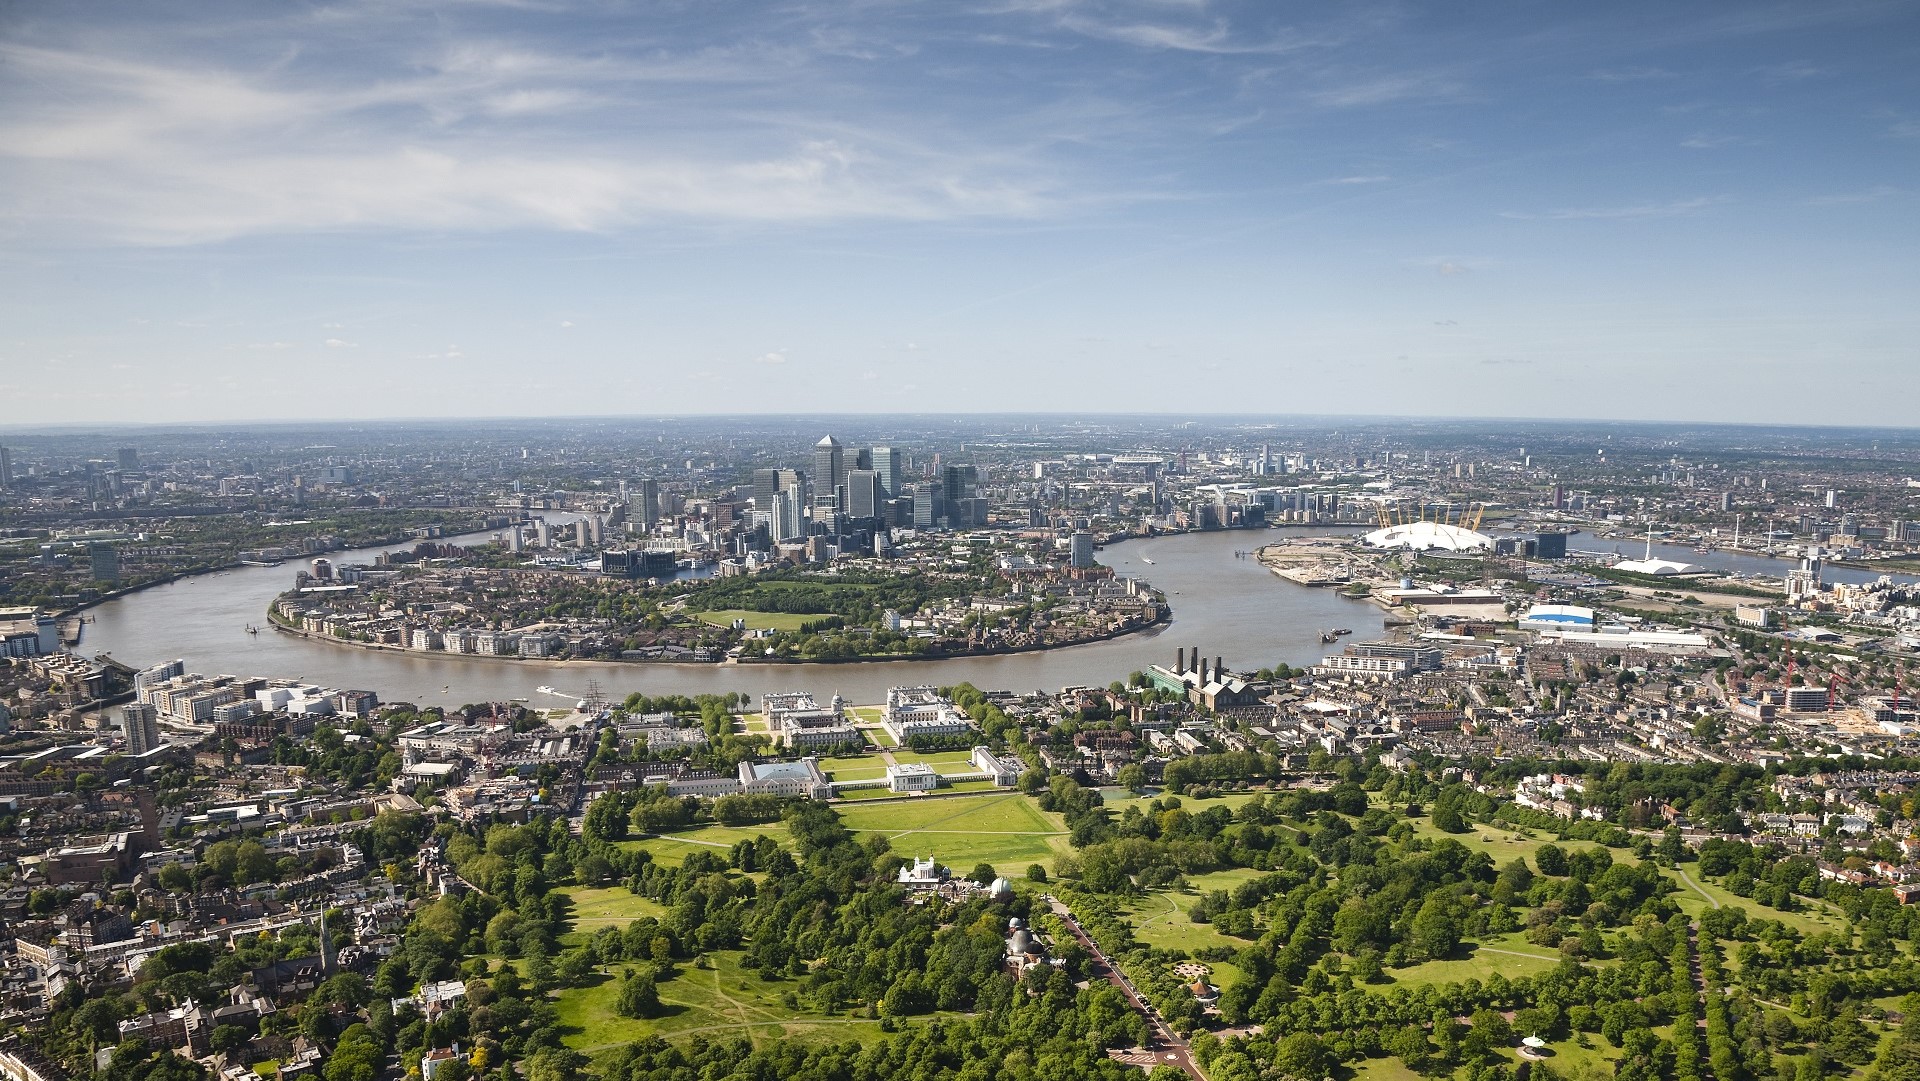 aerial view of the Thames, parks, and skyscrapers in London